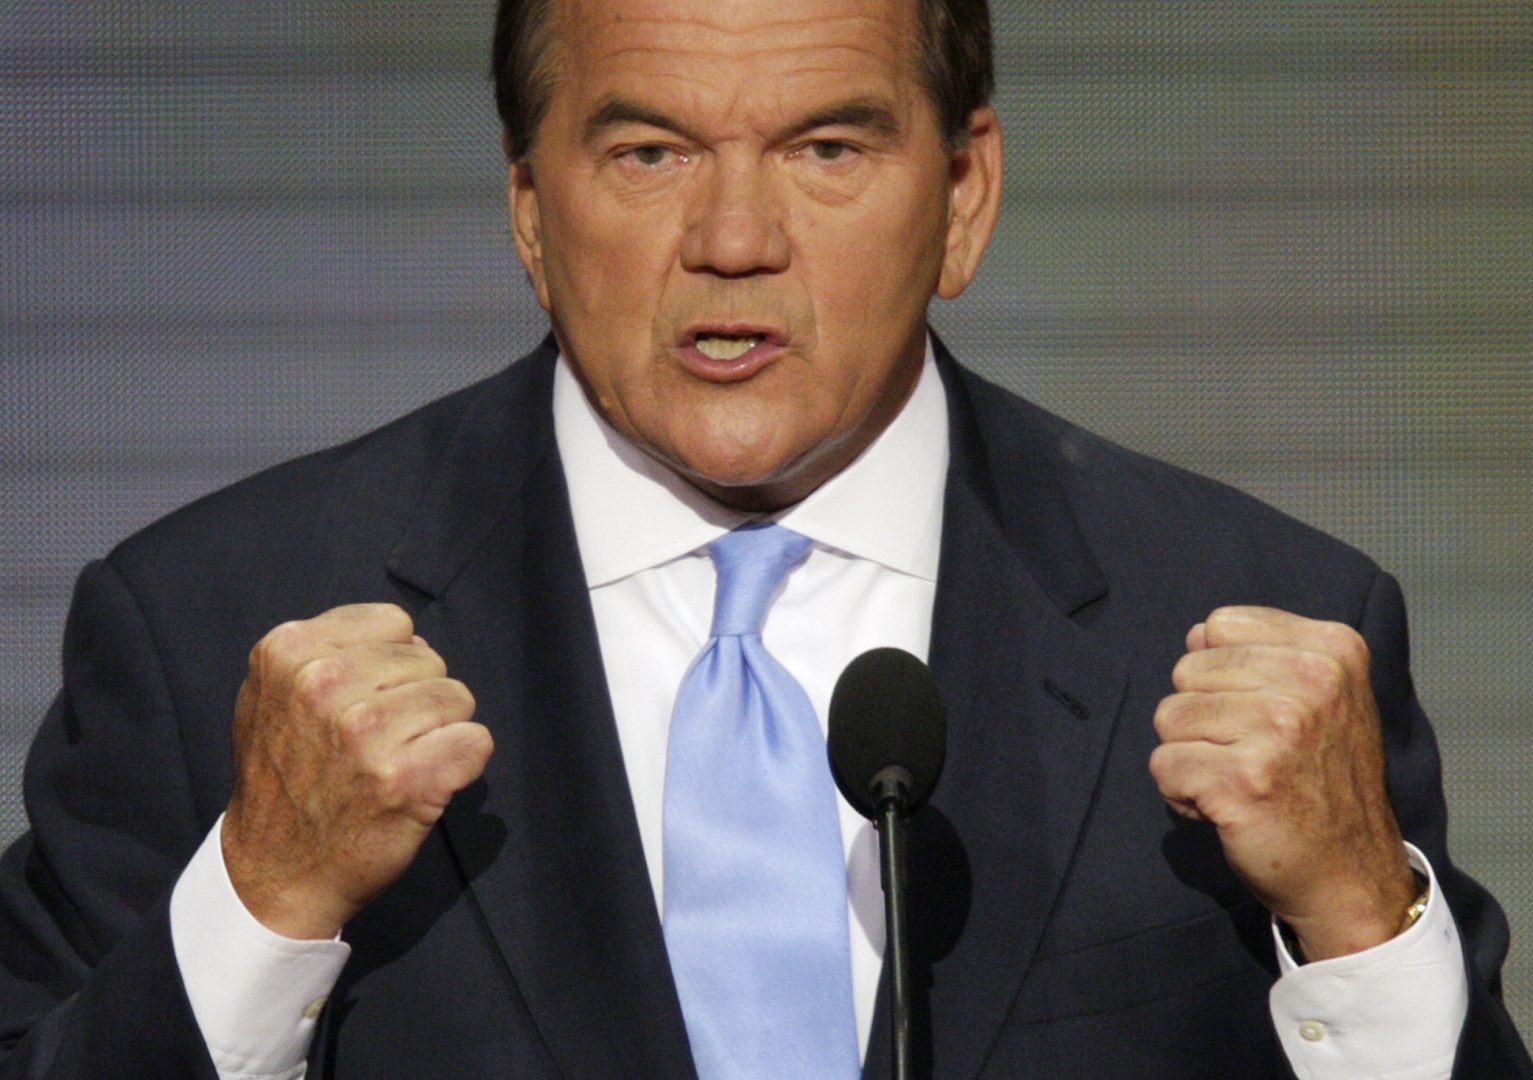 Tom Ridge, former secretary of Homeland Security and former Pennsylvania governor,  speaks at the Republican National Convention in St. Paul, Minn., Thursday, Sept. 4, 2008.  (AP Photo/Ron Edmonds)